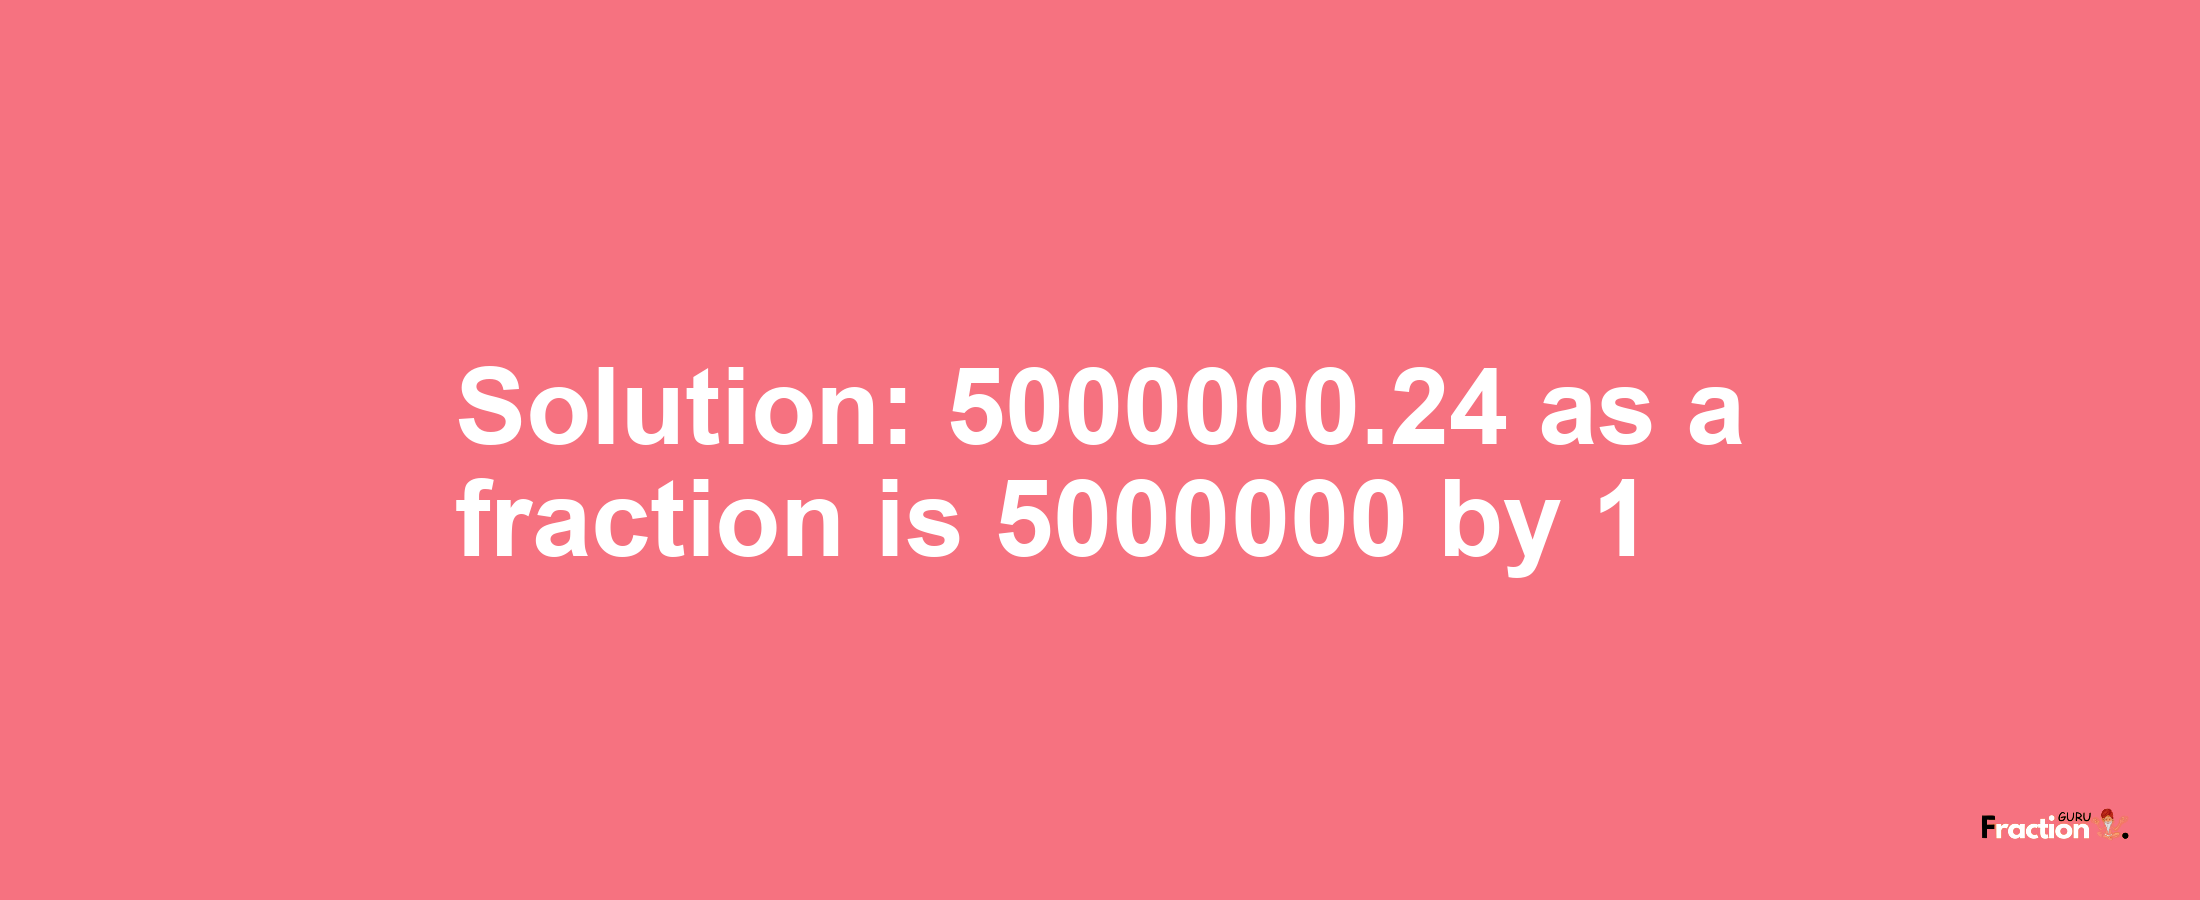 Solution:5000000.24 as a fraction is 5000000/1